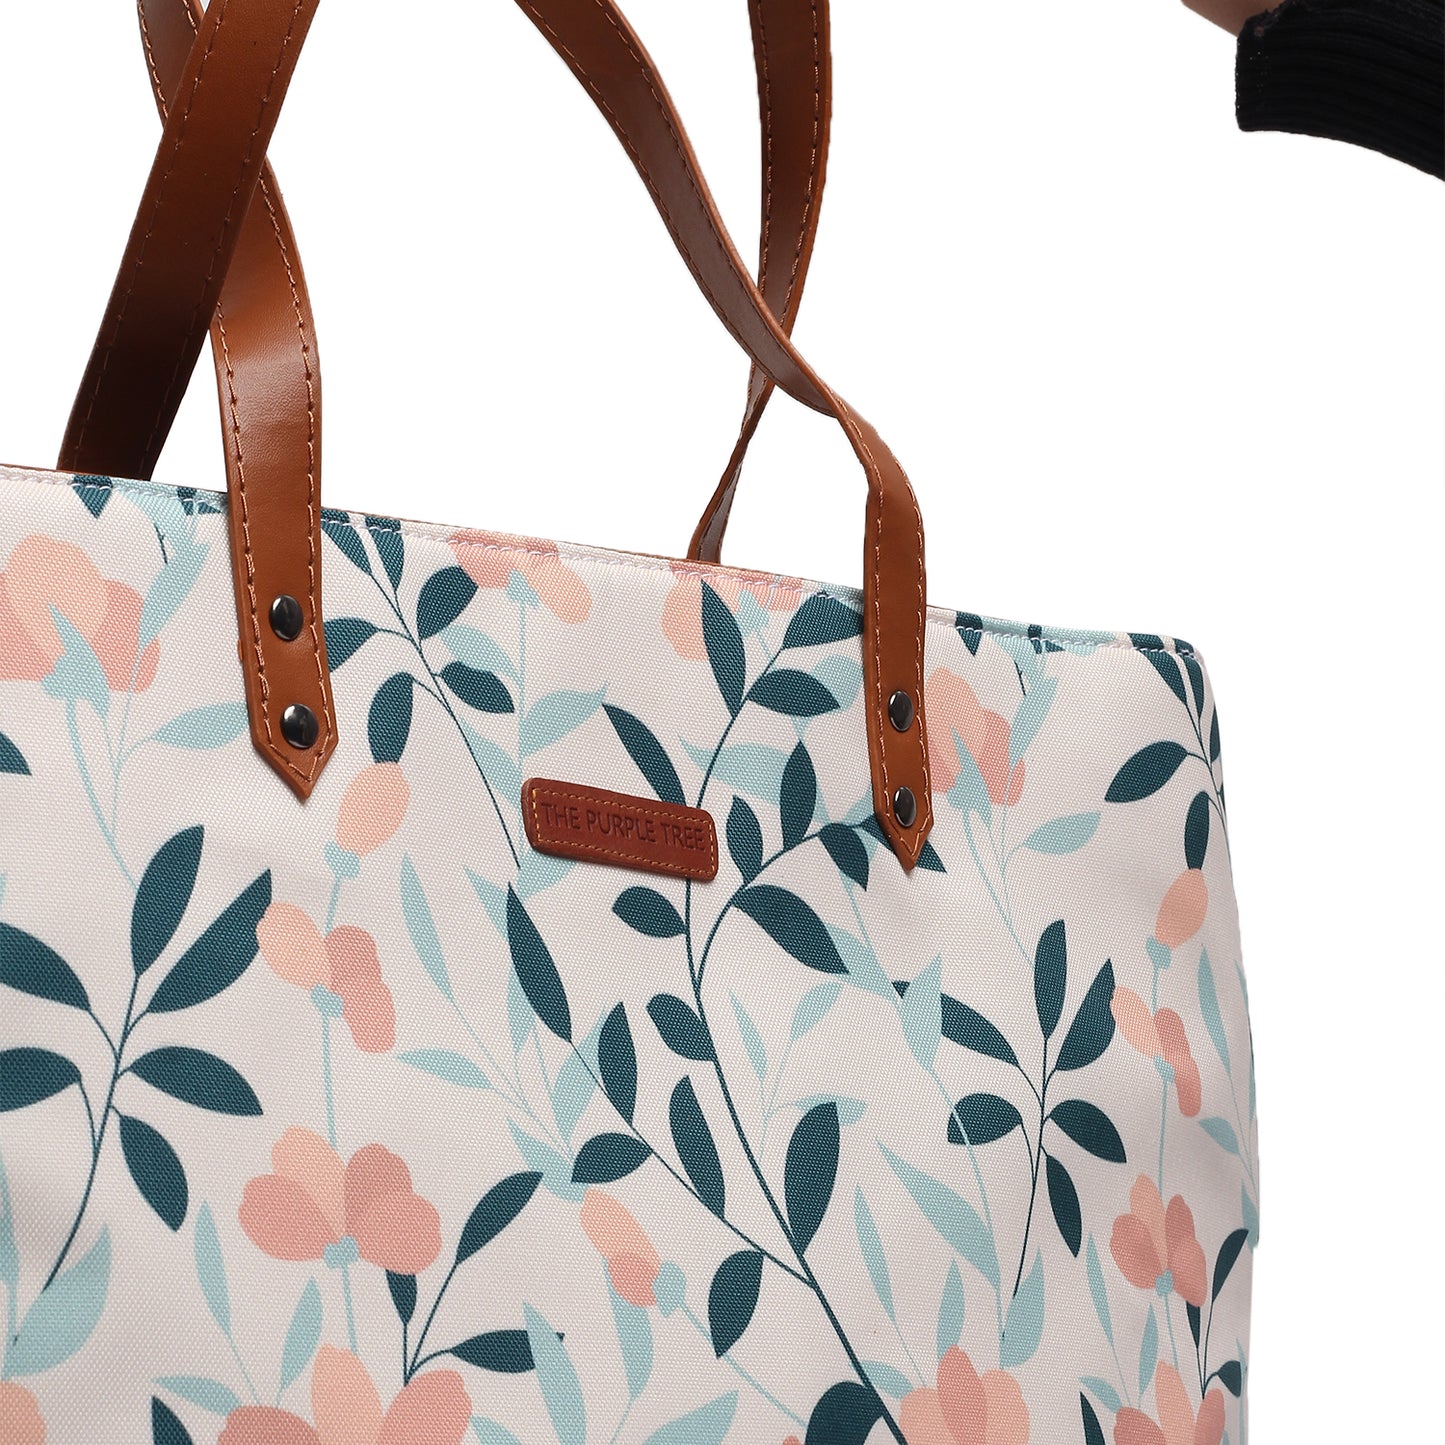 A tote bag with a brown leather handle, featuring a beautiful floral pattern. Perfect for adding a touch of style to any outfit.